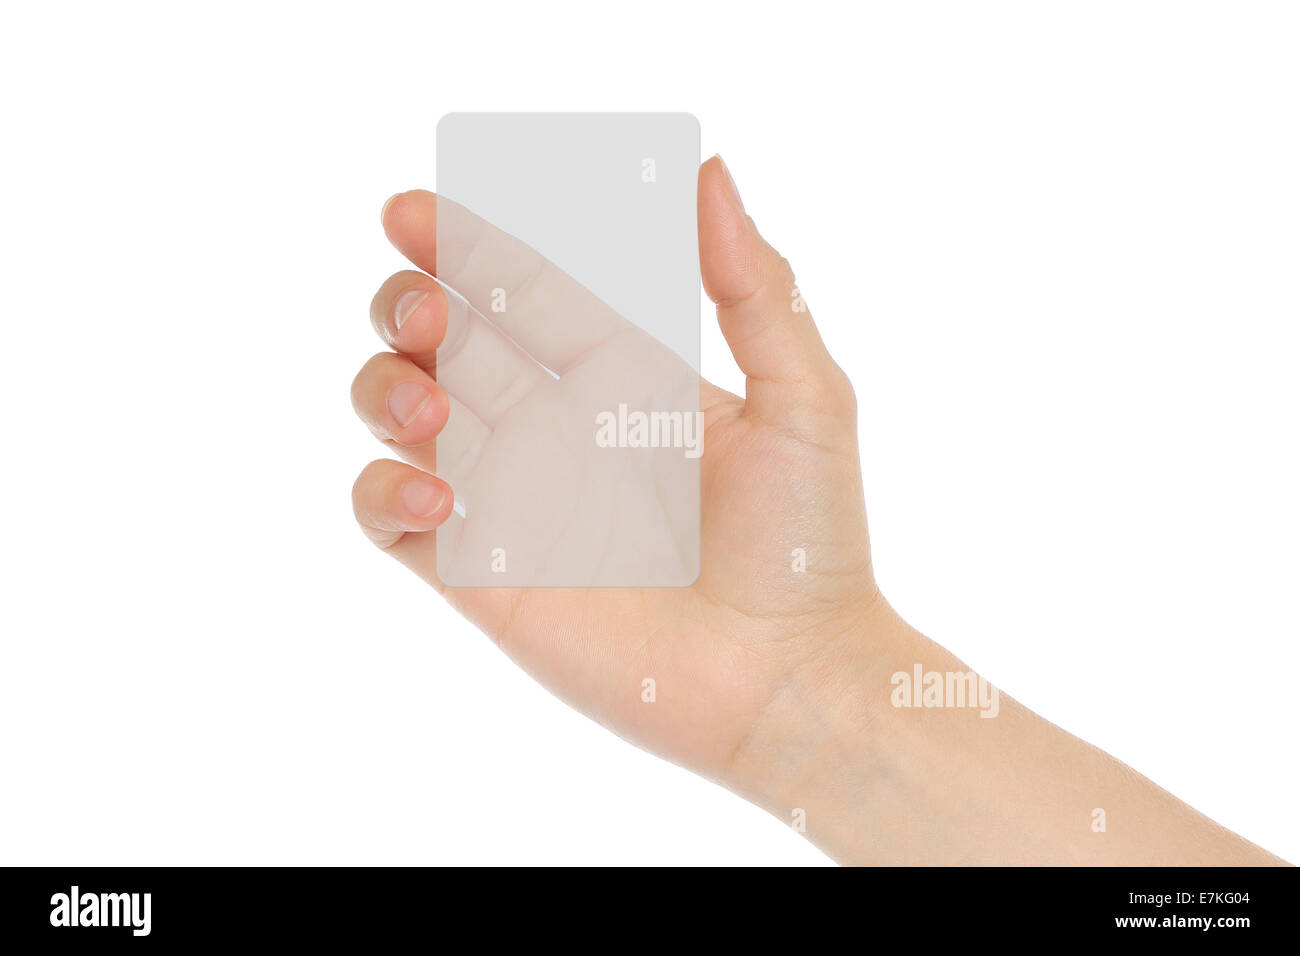 Hand holds transparent card on white background Stock Photo